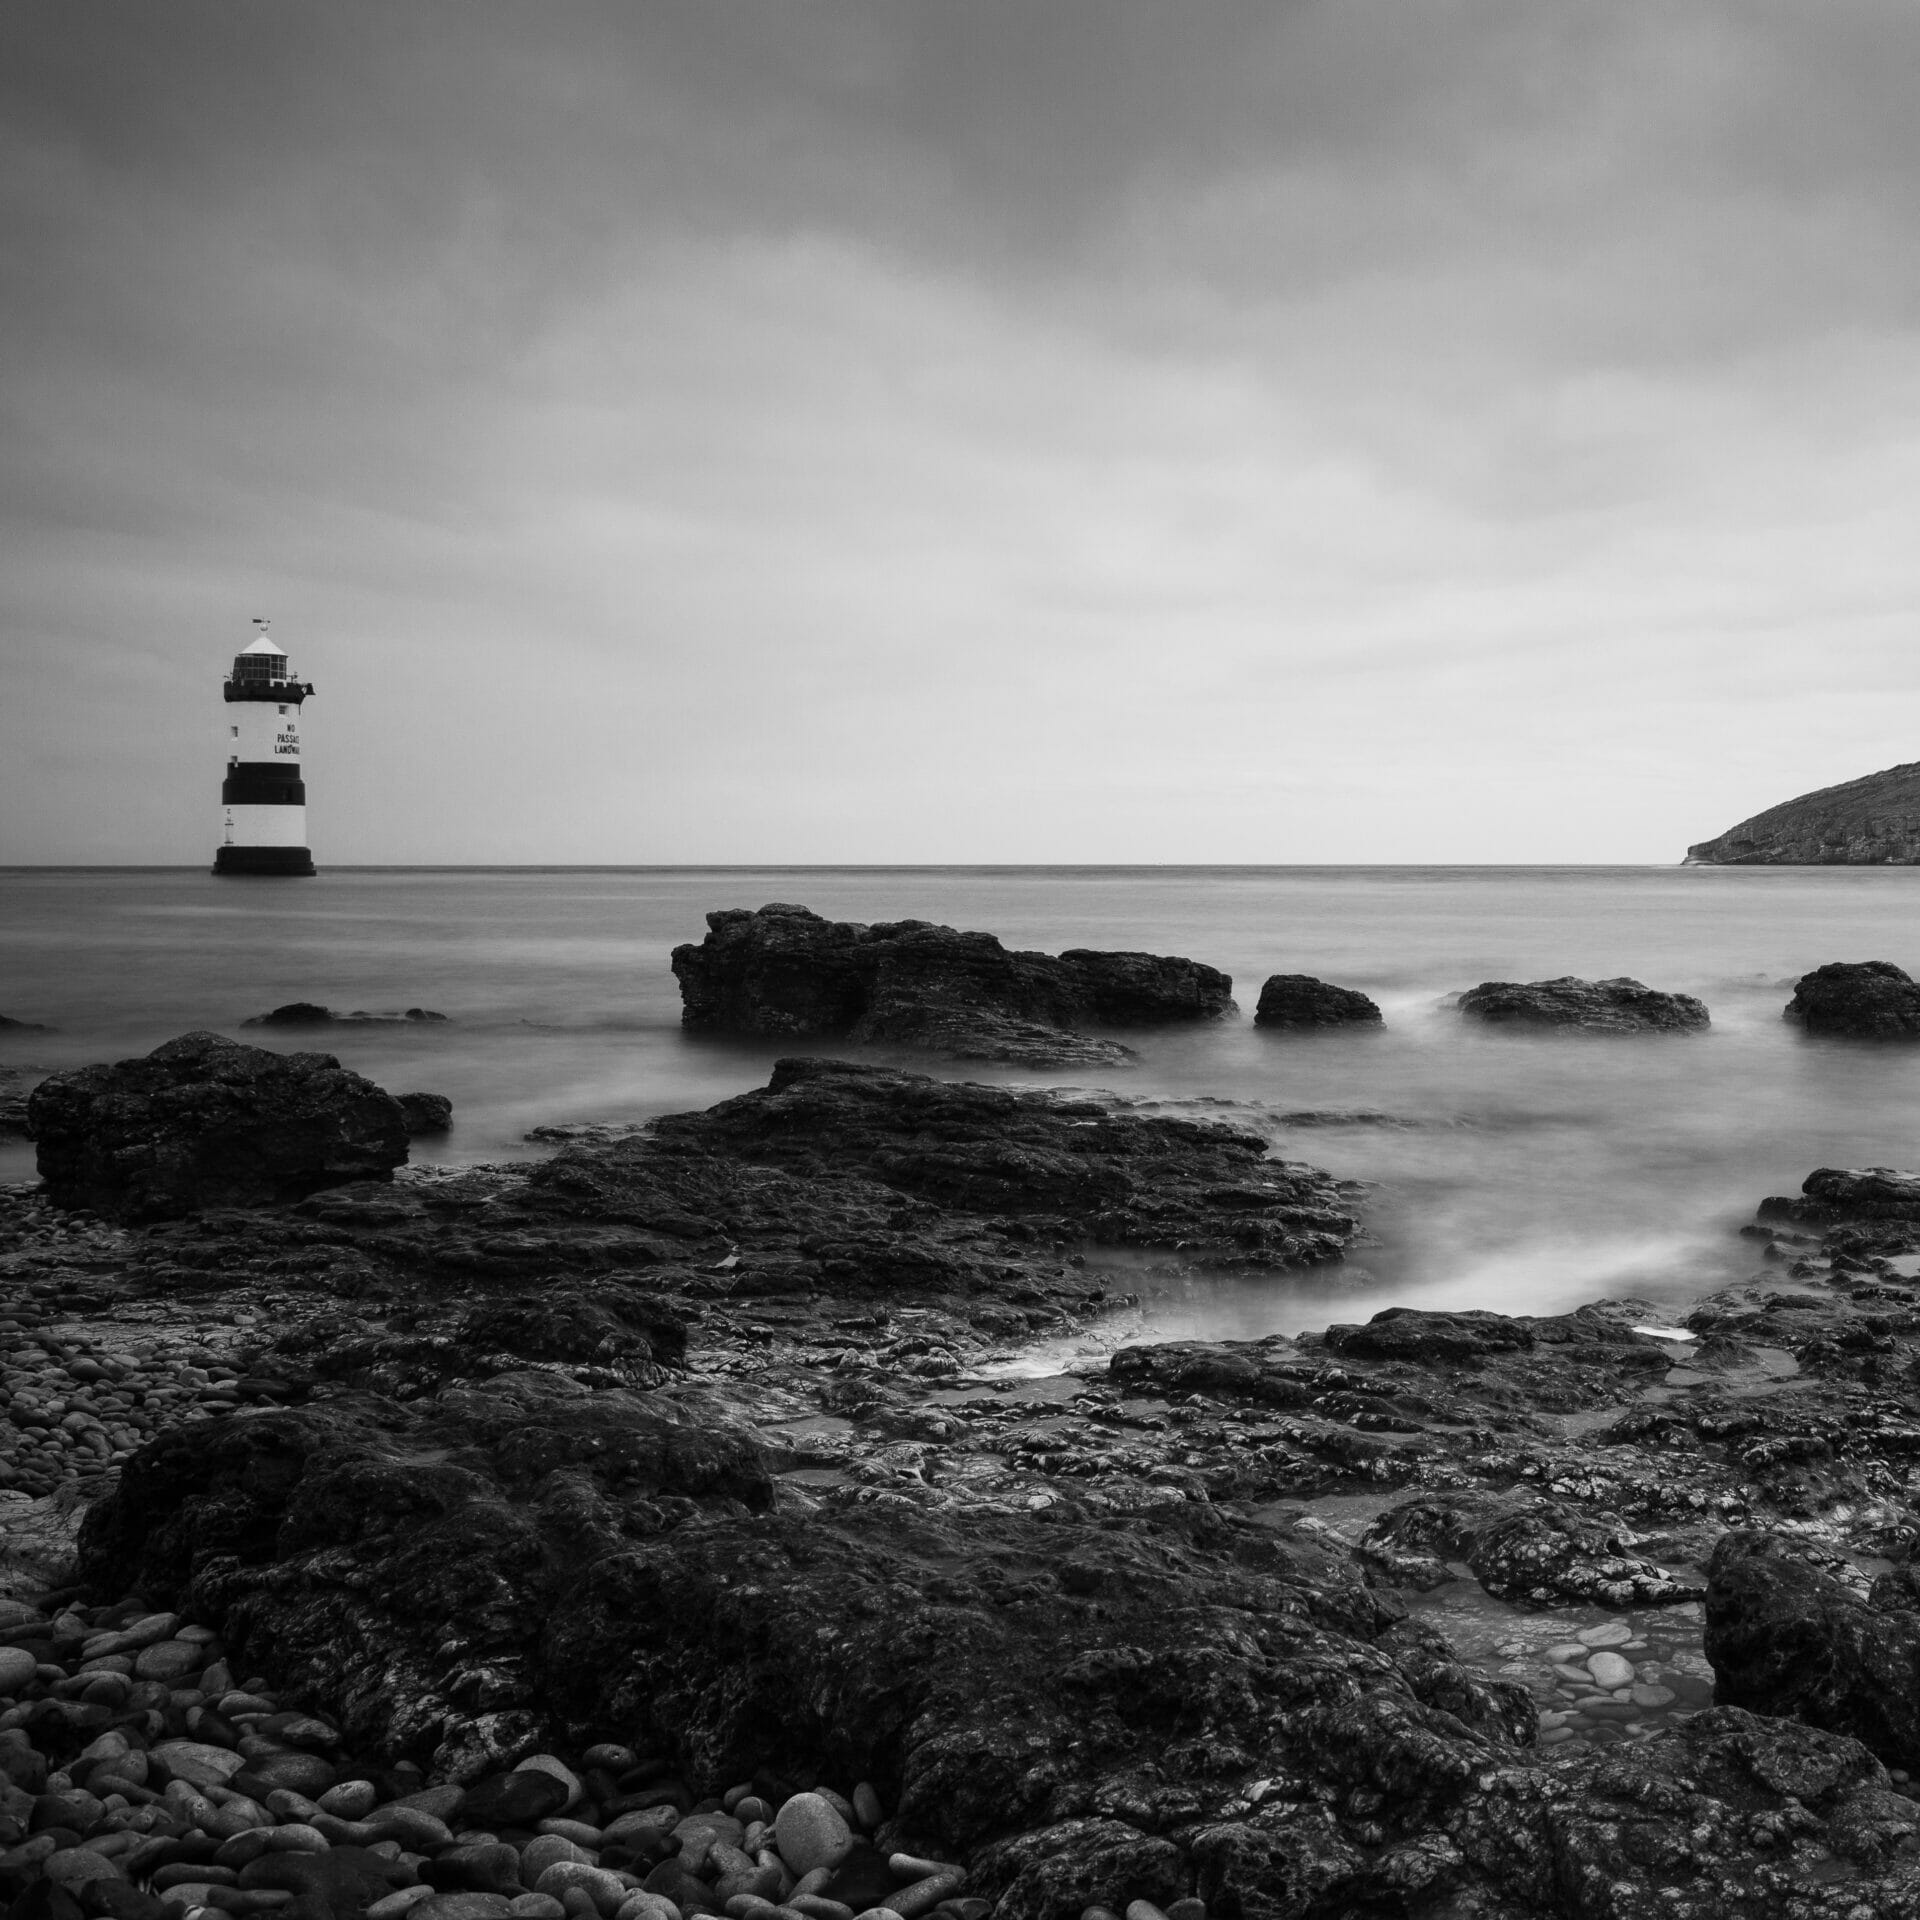 Piers, Lighthouses & Seascape Photography - Anglesey Photographic Academy Evening - June 2022 #3